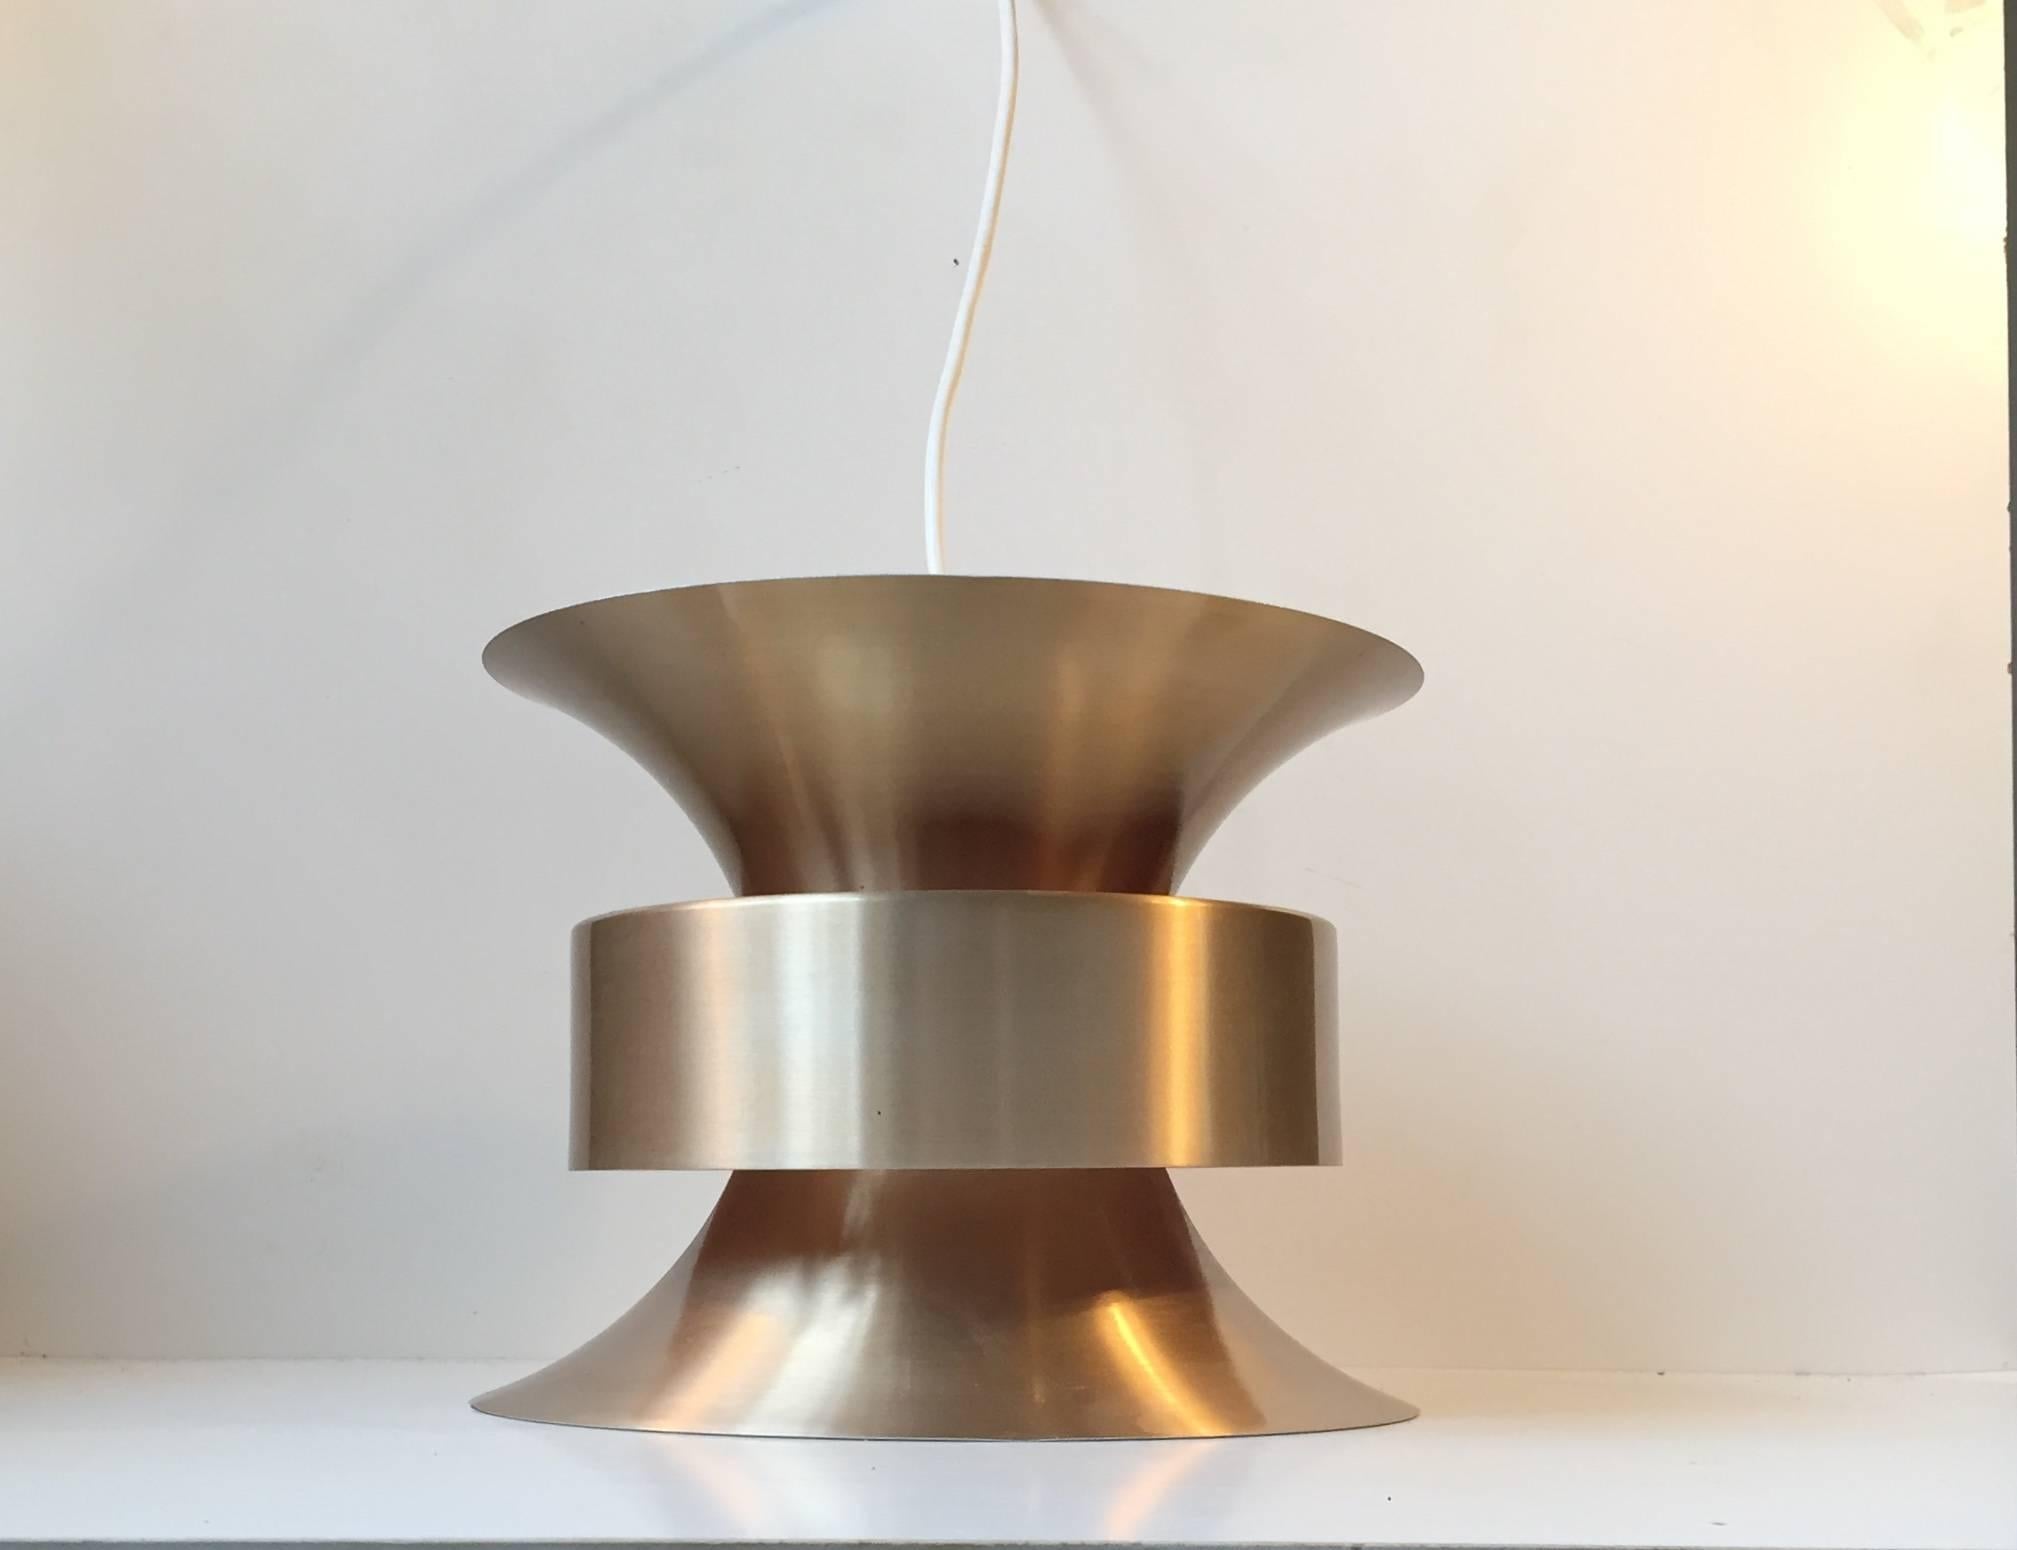 This pendant light was designed by Bent Nordsted. It was manufactured in the 1960s-1970s and is made from brass-alloy aluminum, and has orange and white reflective inner shades. This style of lamp corresponds stylistically with design by Carl Thore